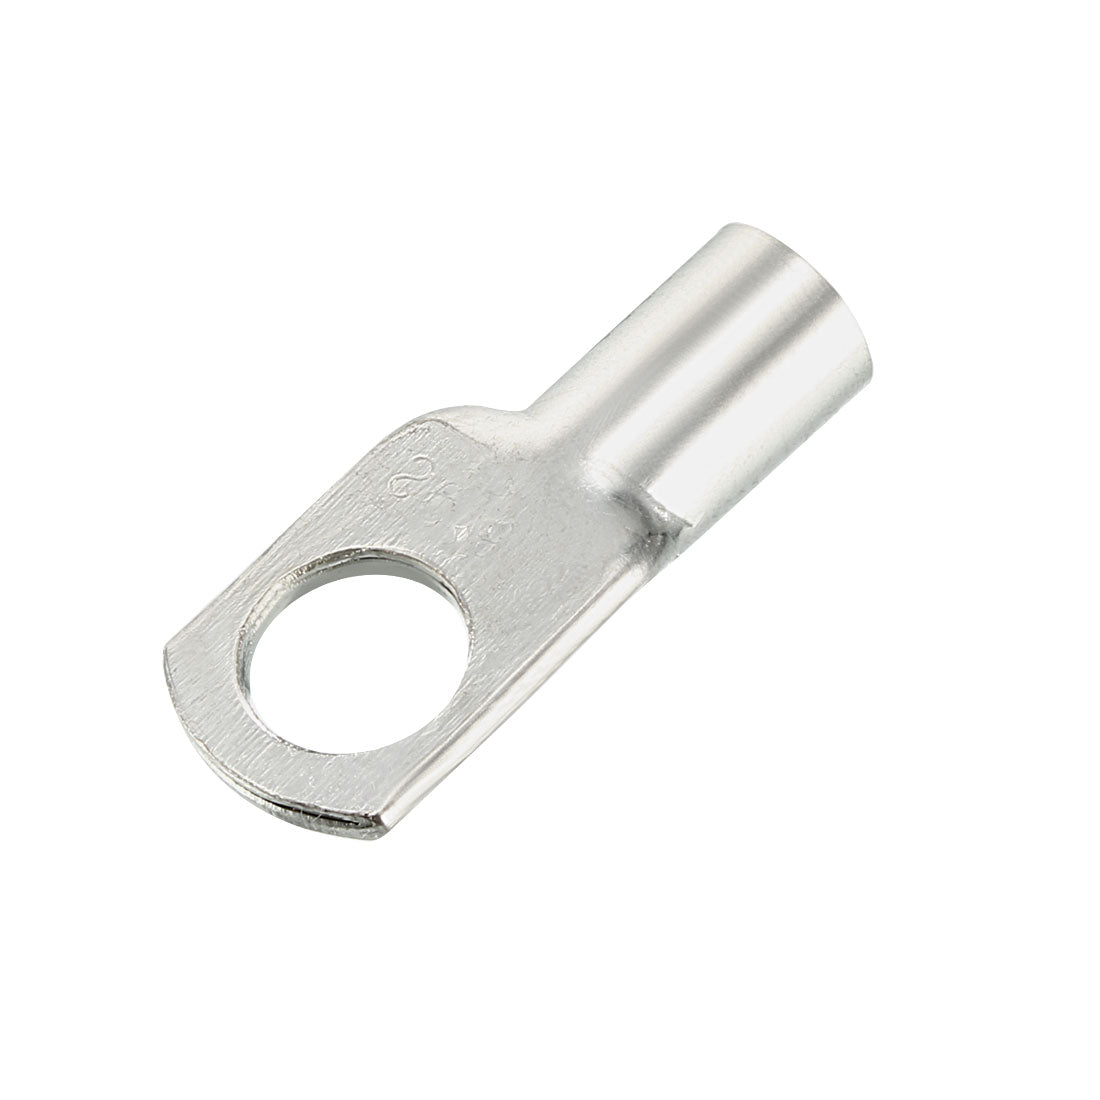 uxcell Uxcell 100Pcs SC16-8 Non-Insulated U-Type Copper Crimp Terminals 16mm2 Wire Connector Silver Tone